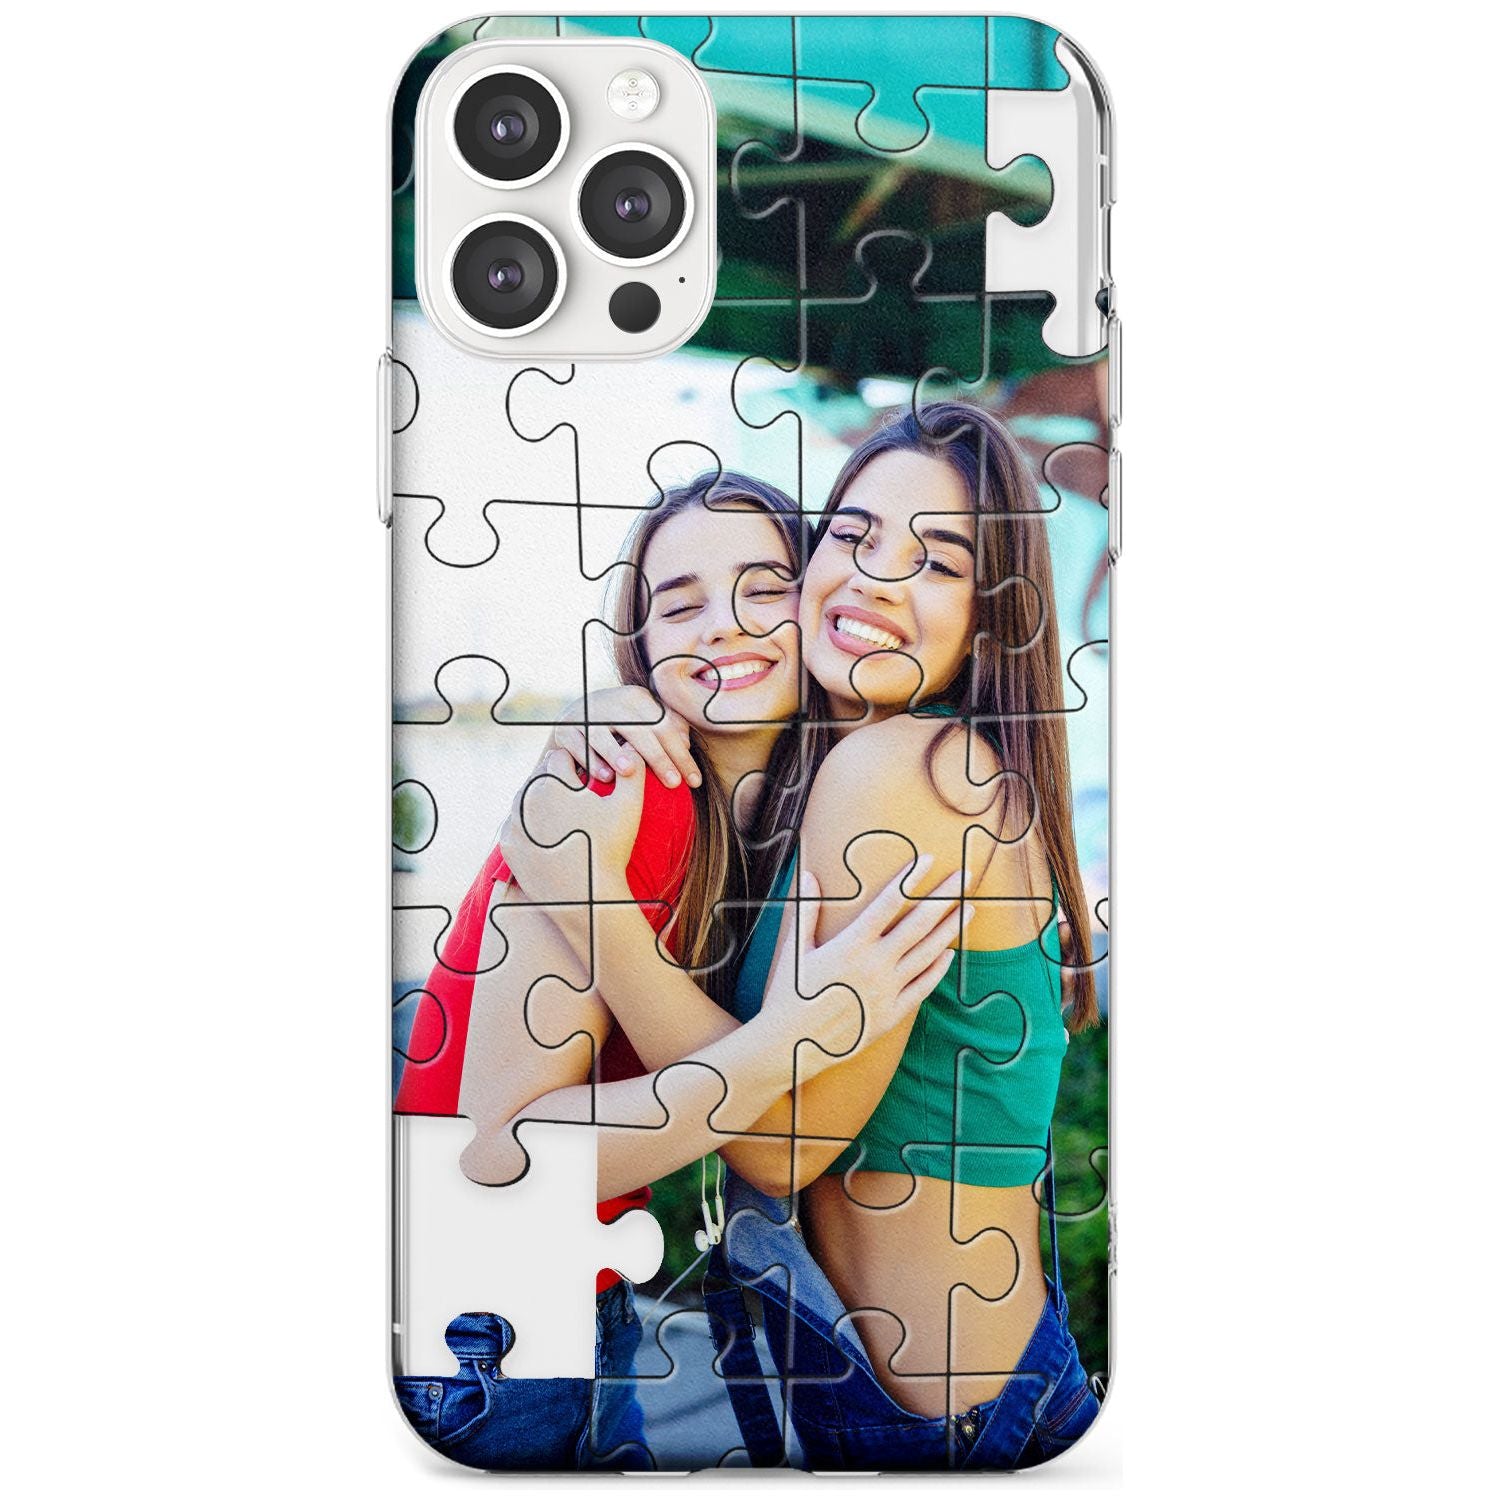 Personalised Jigsaw Puzzle Photo Slim TPU Phone Case for iPhone 11 Pro Max